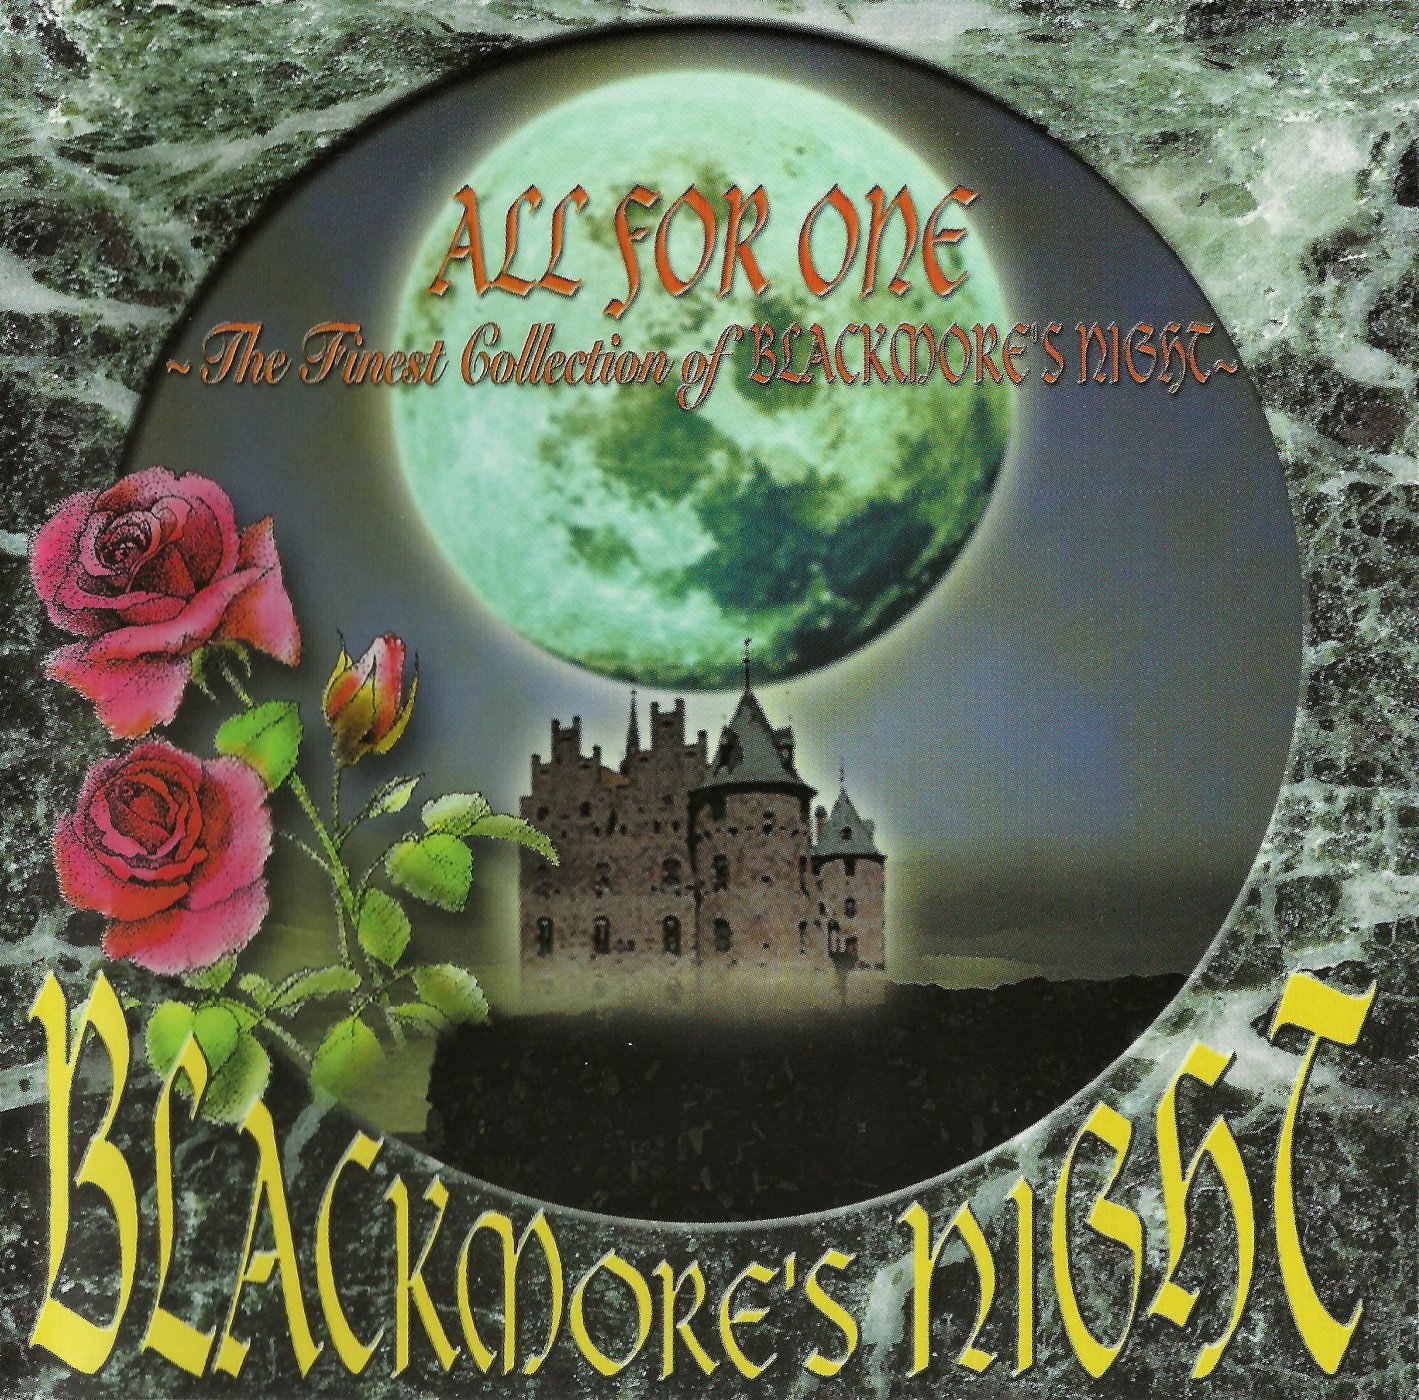 All for one - The finest collection of Blackmore's Night — Blackmore's Night  | Last.fm